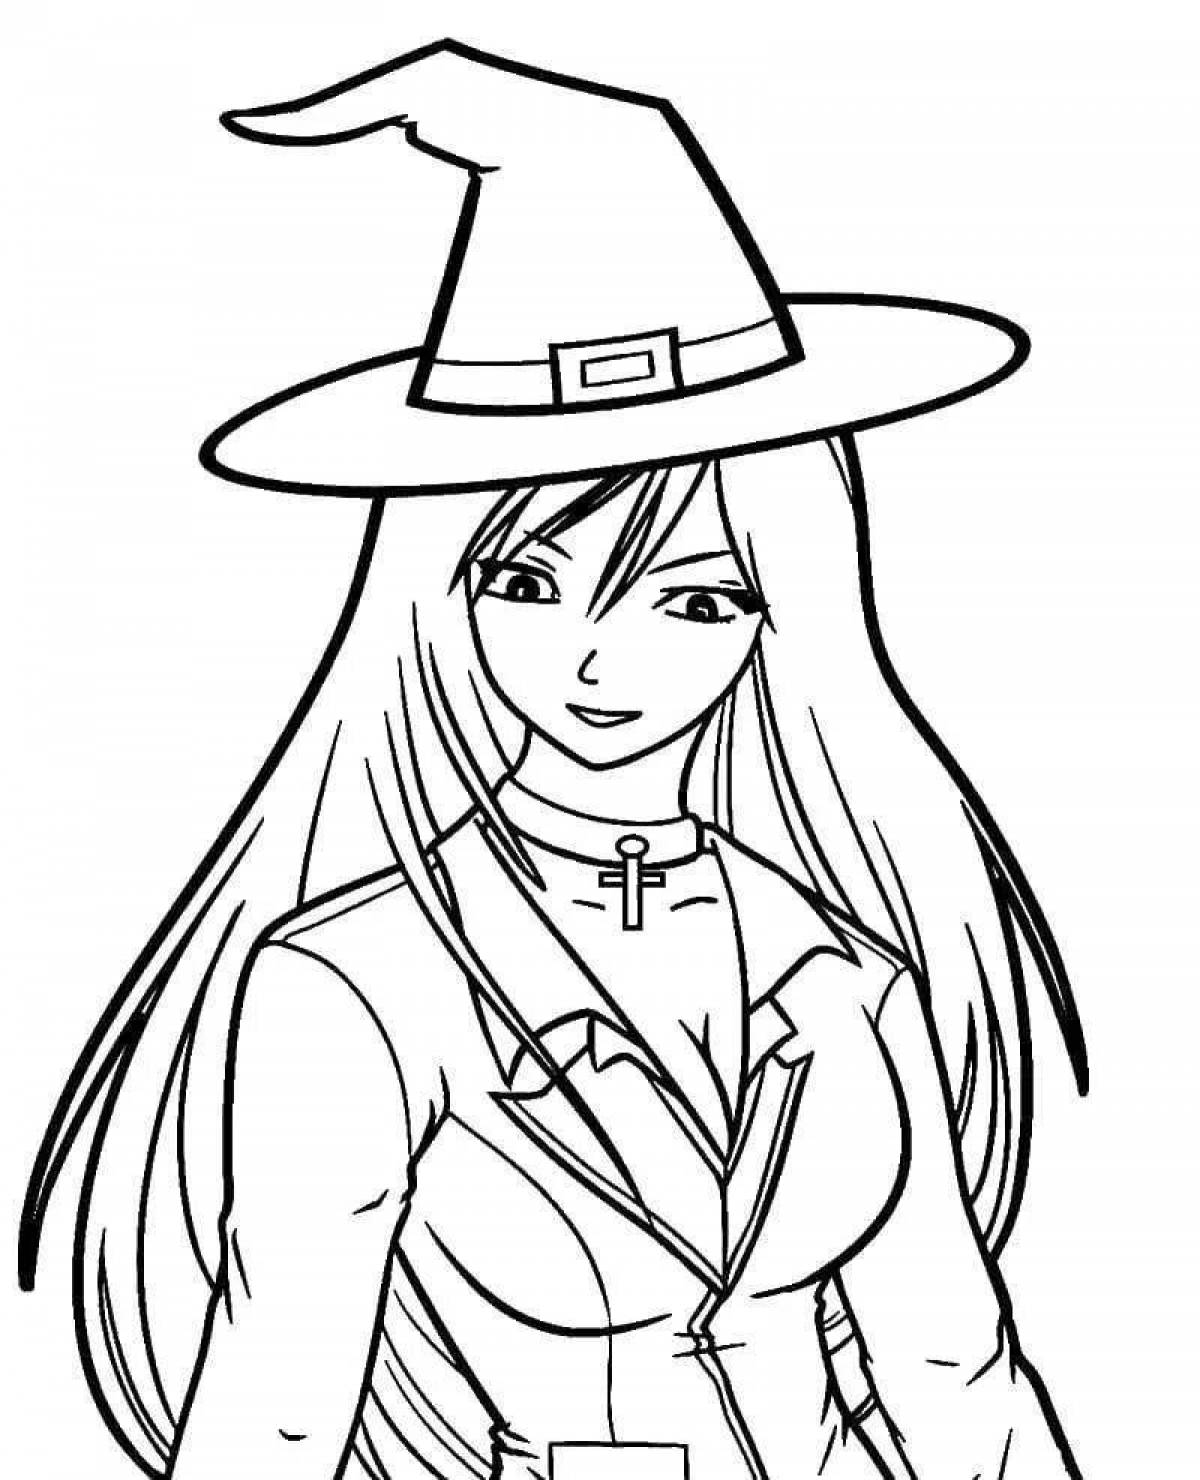 Anime witch #1